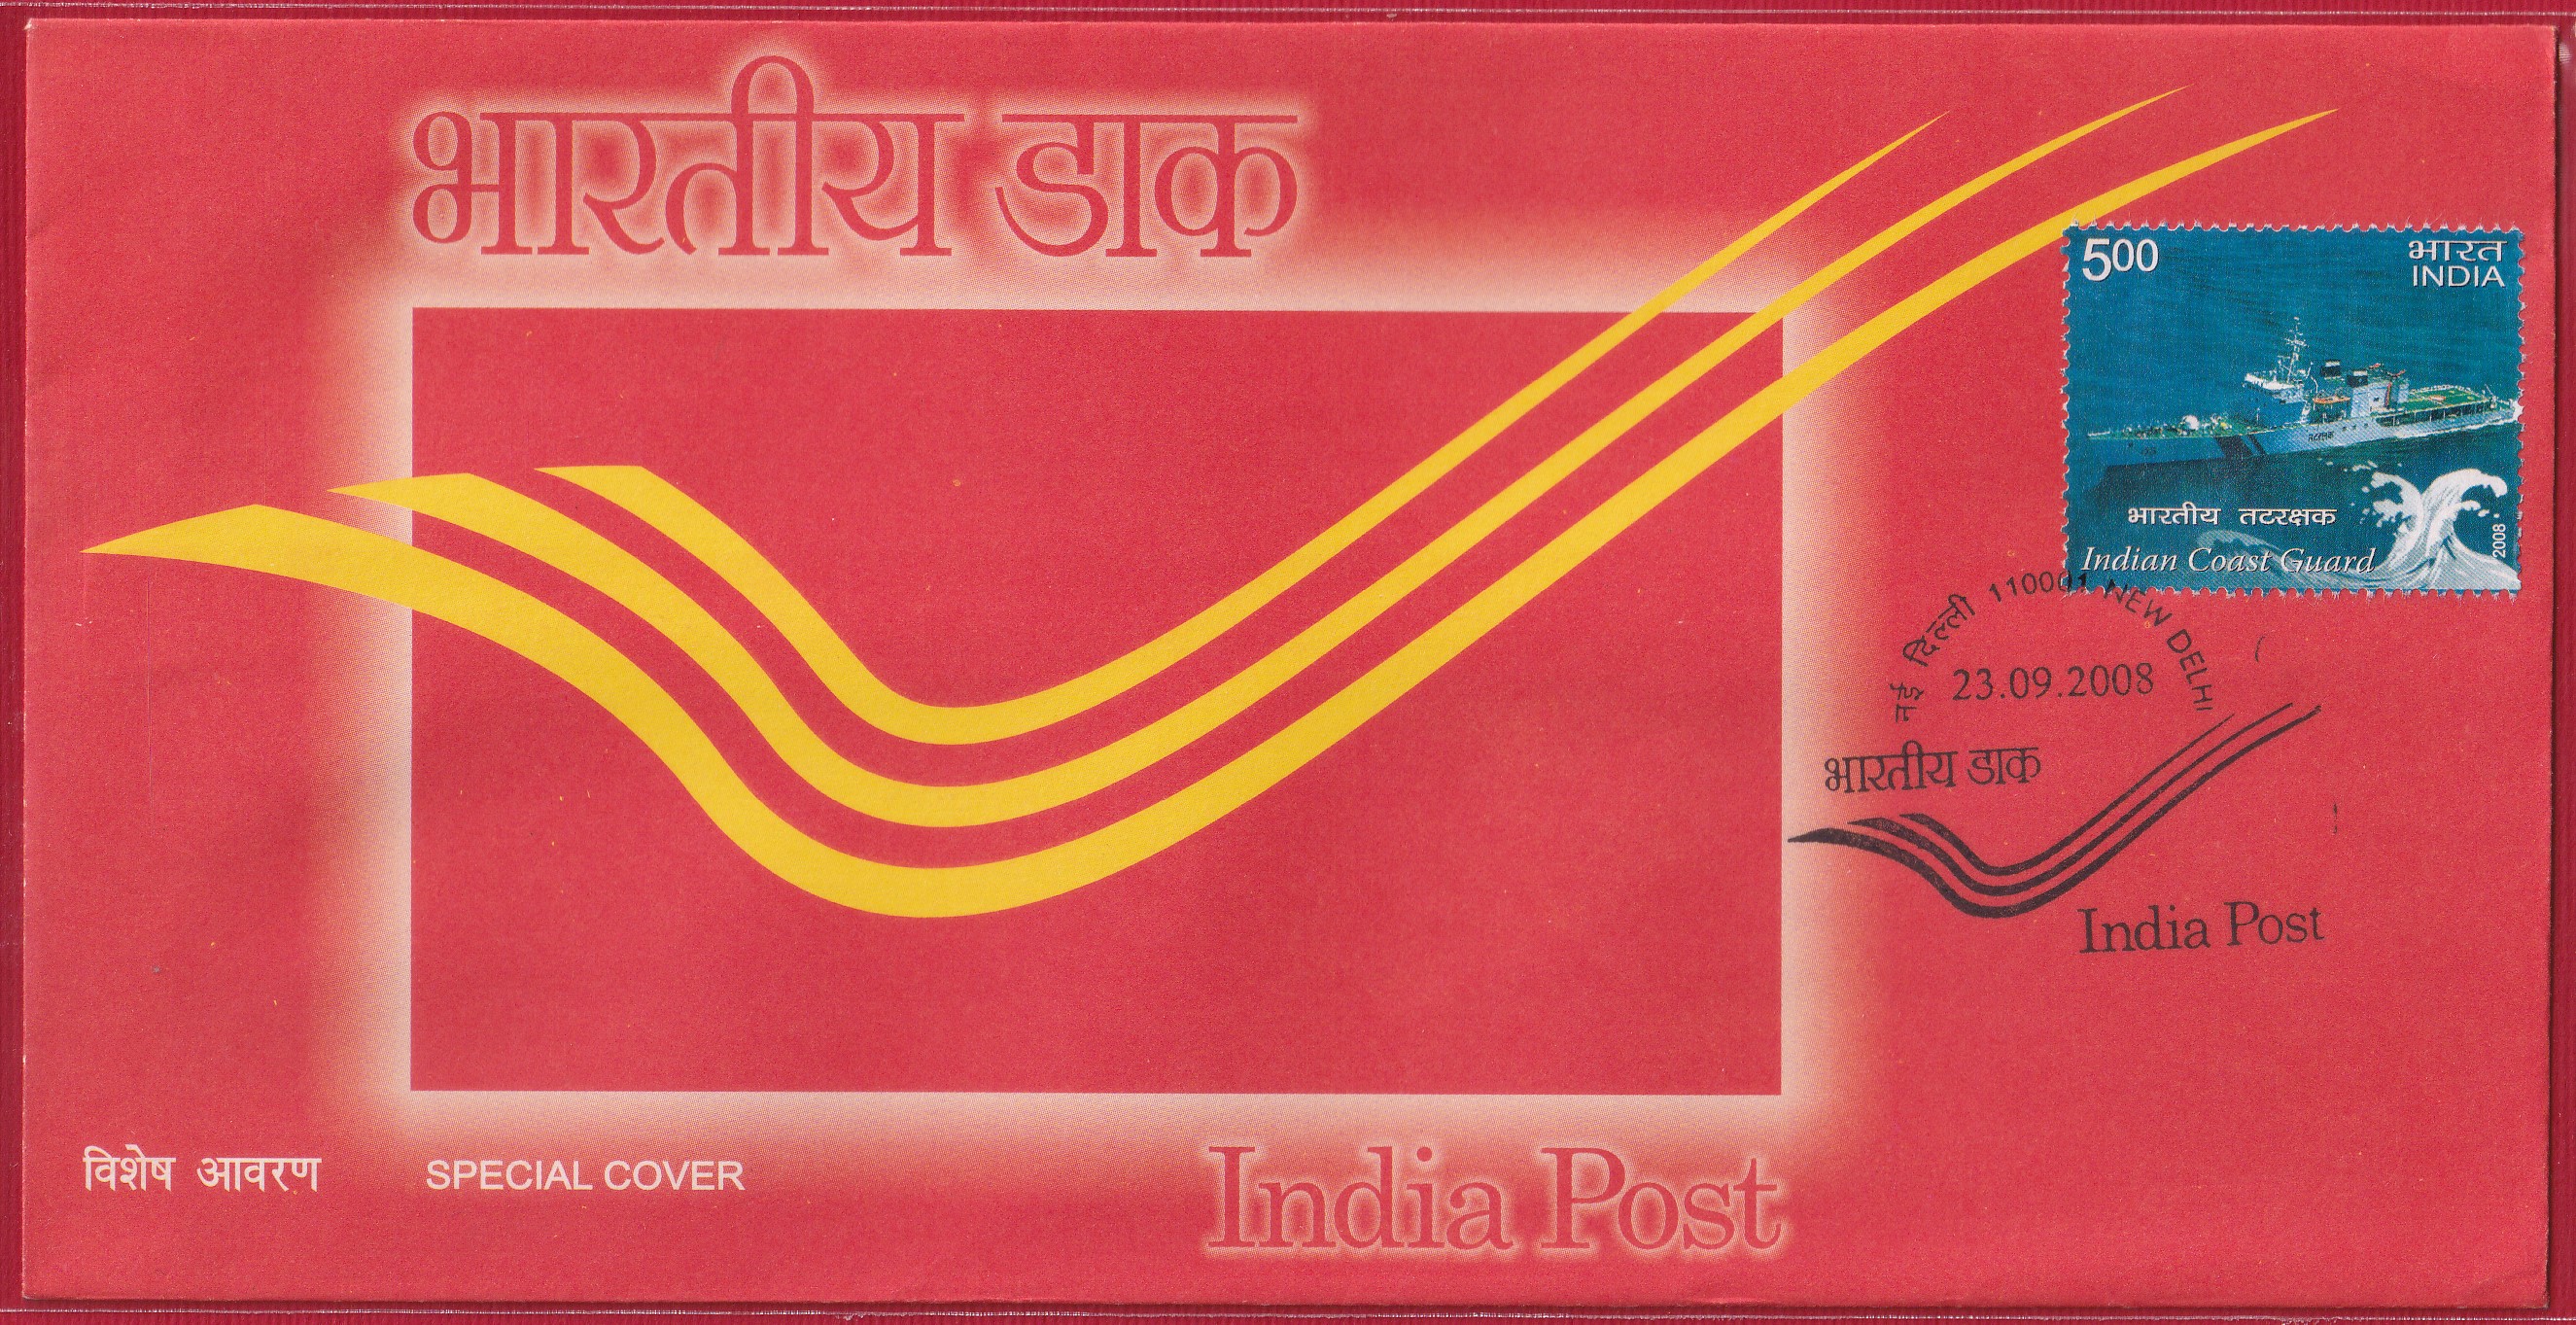 India Post Payments Bank: This 'warning' about India Post Payments bank is  fake - Times of India